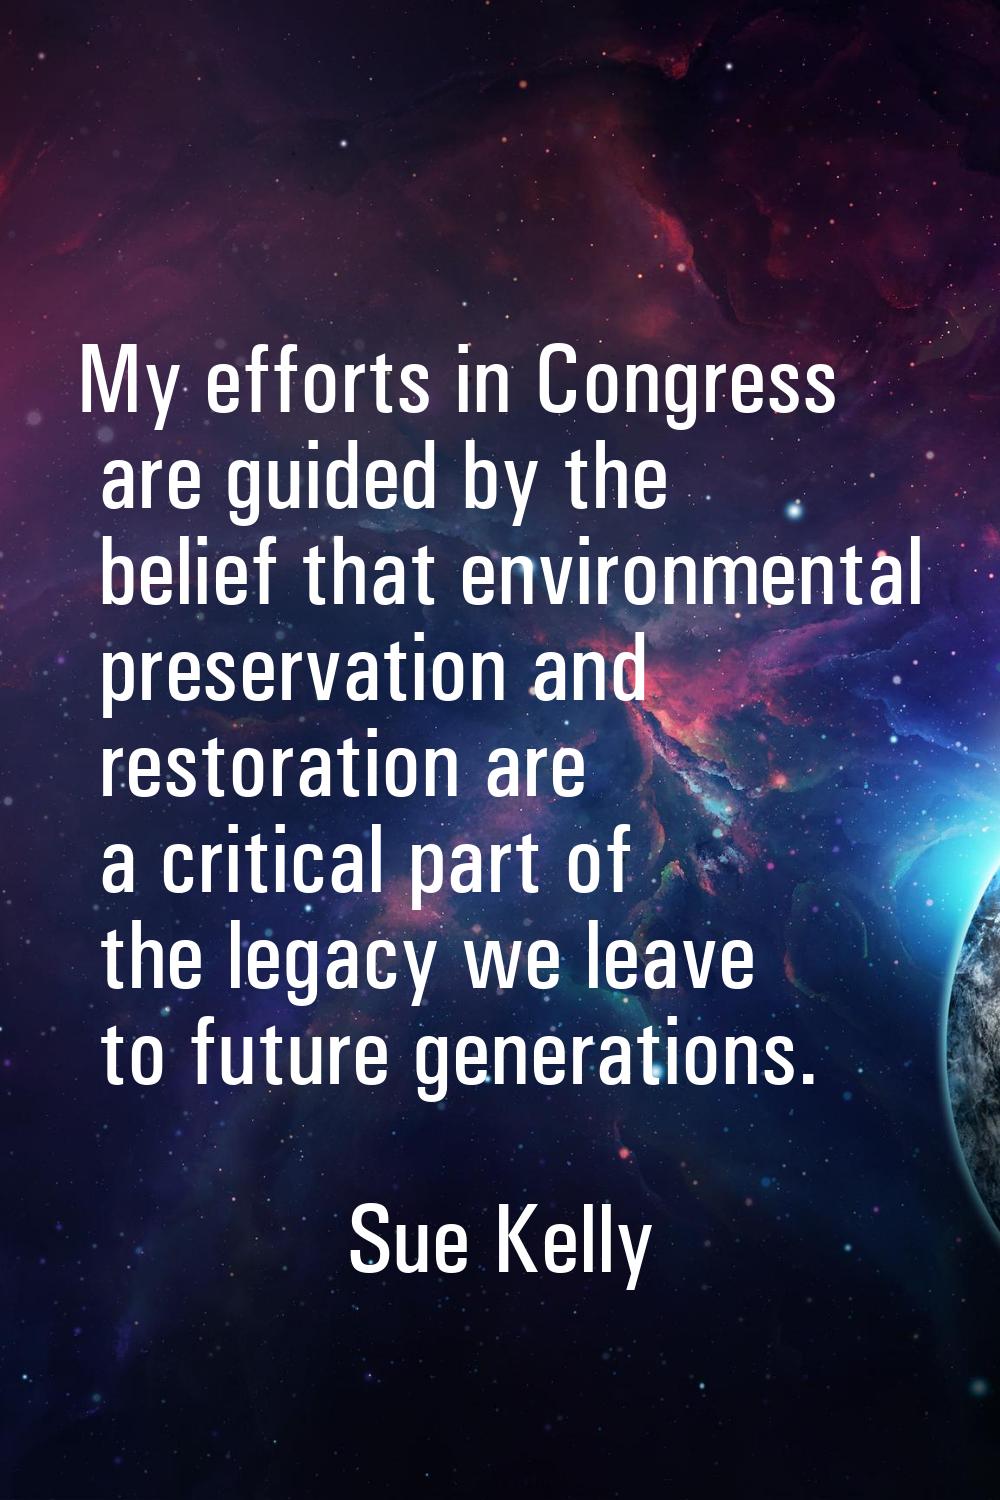 My efforts in Congress are guided by the belief that environmental preservation and restoration are